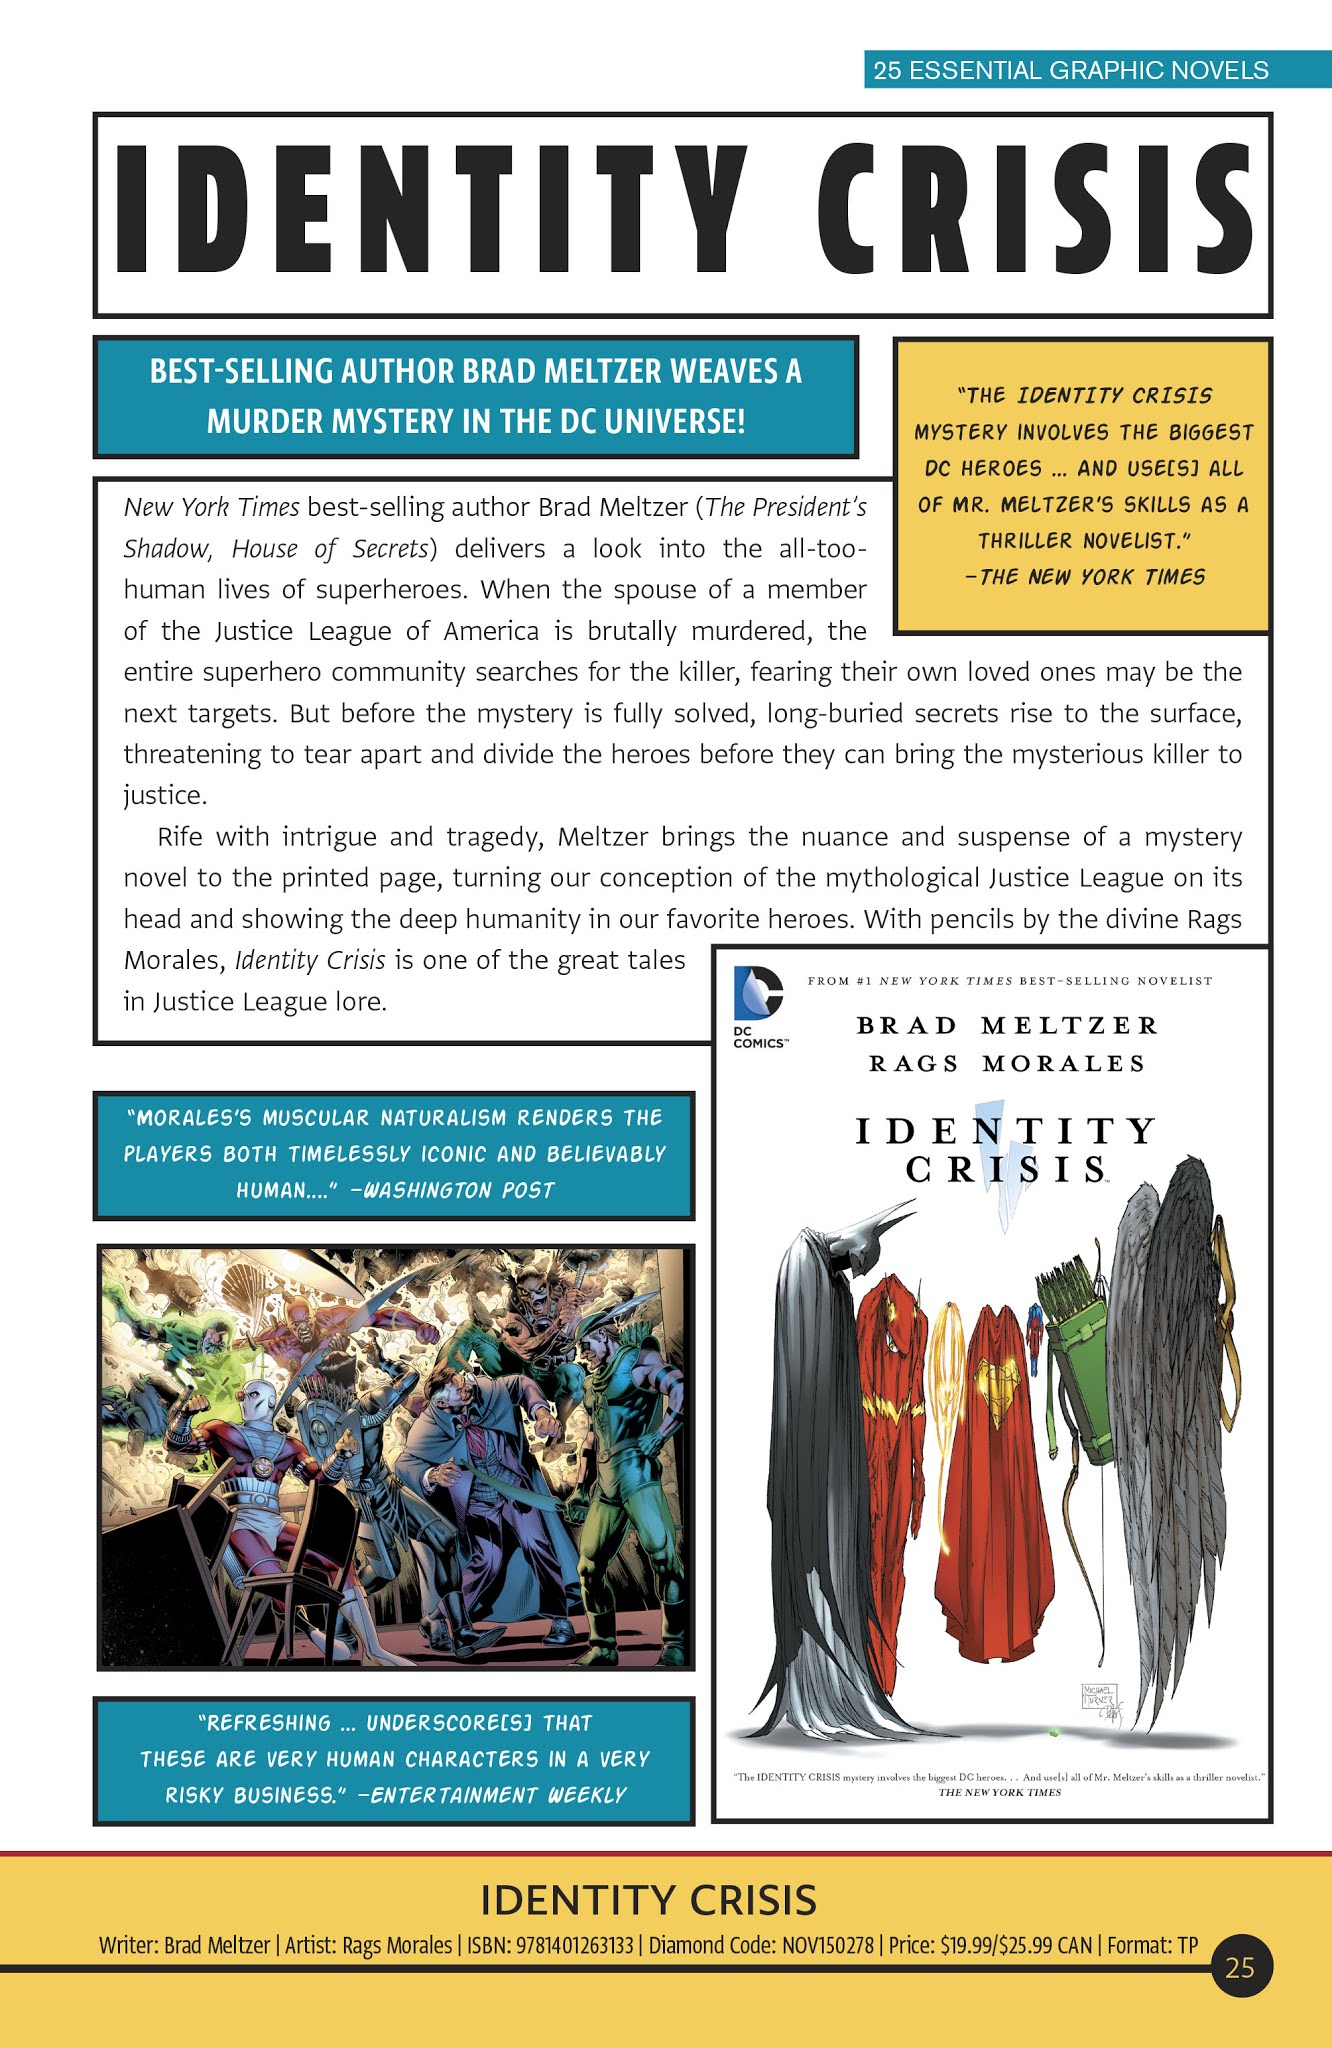 Read online DC Essential Graphic Novels 2019 comic -  Issue # TPB - 26